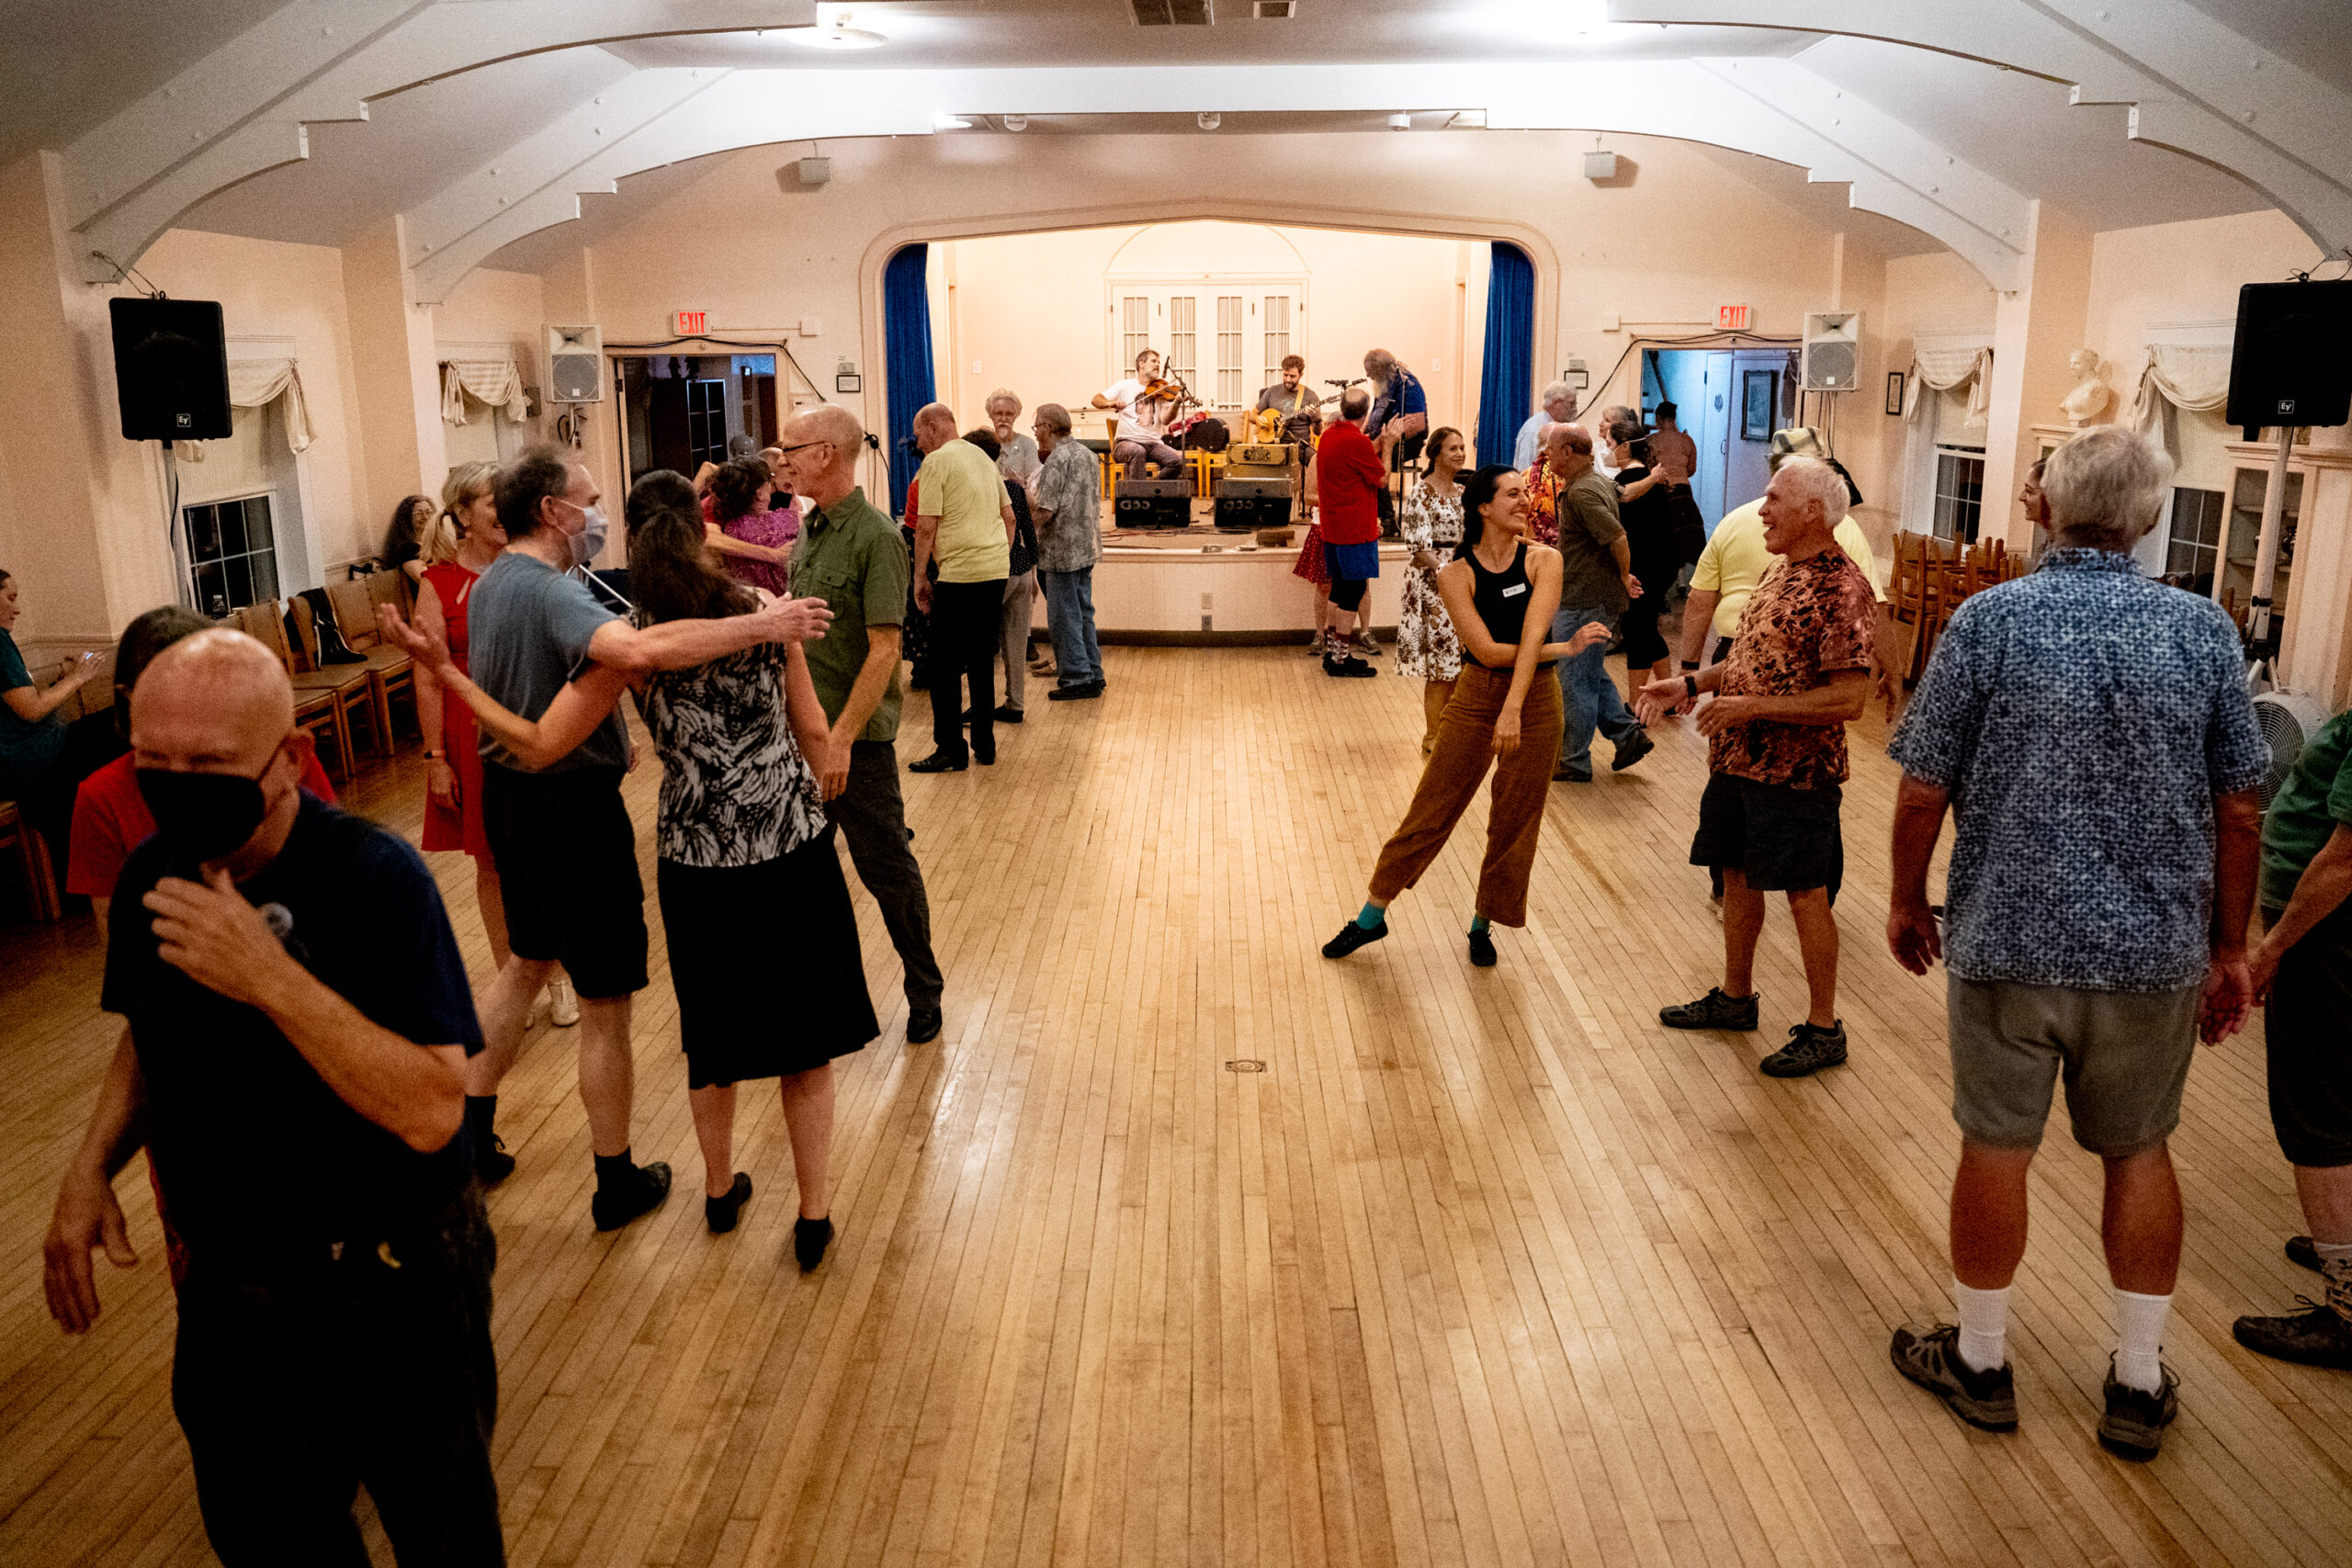 Dozens of people smile and hug each other in a barn-like dance hall.